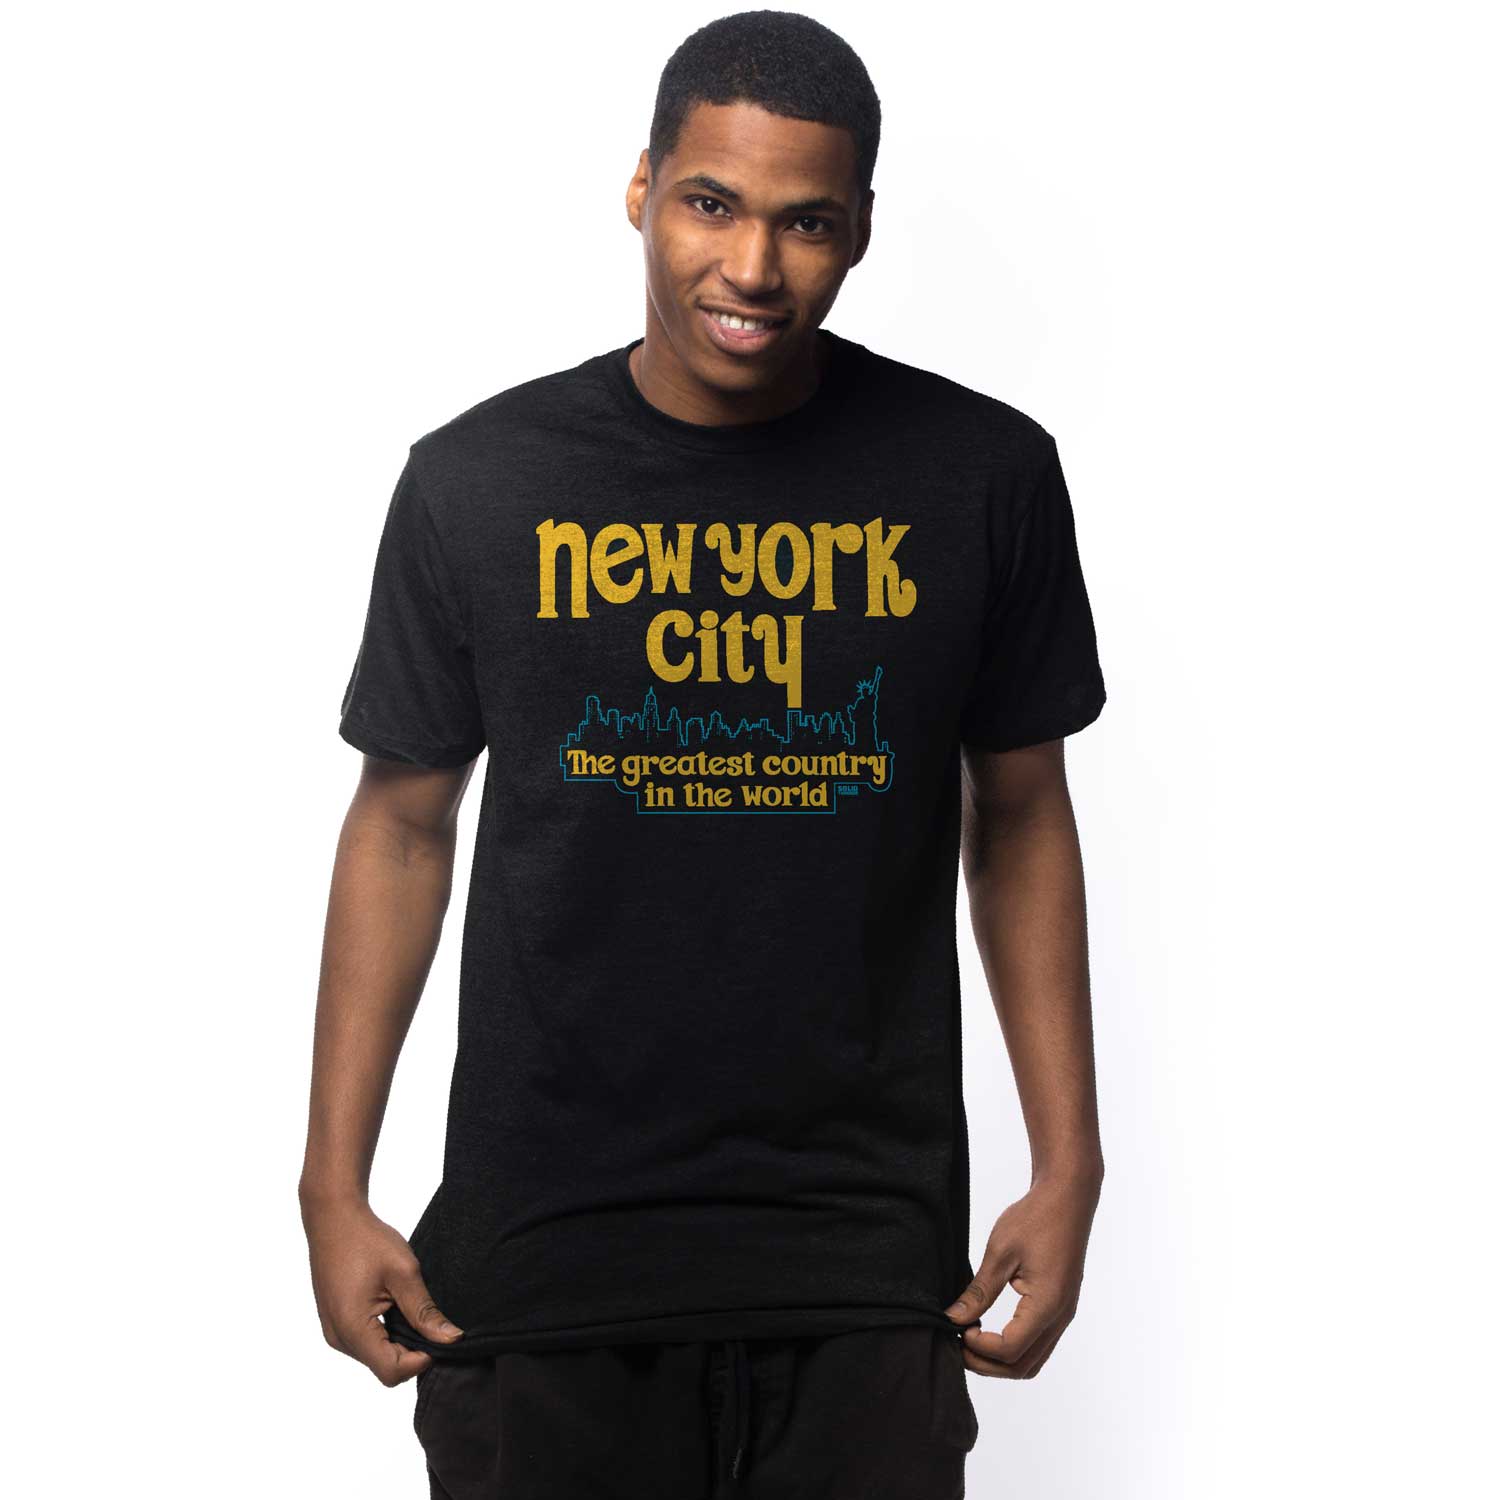 Cool New Orleans T-shirts & Vintage Mardi Gras Graphic Tees - Solid Threads